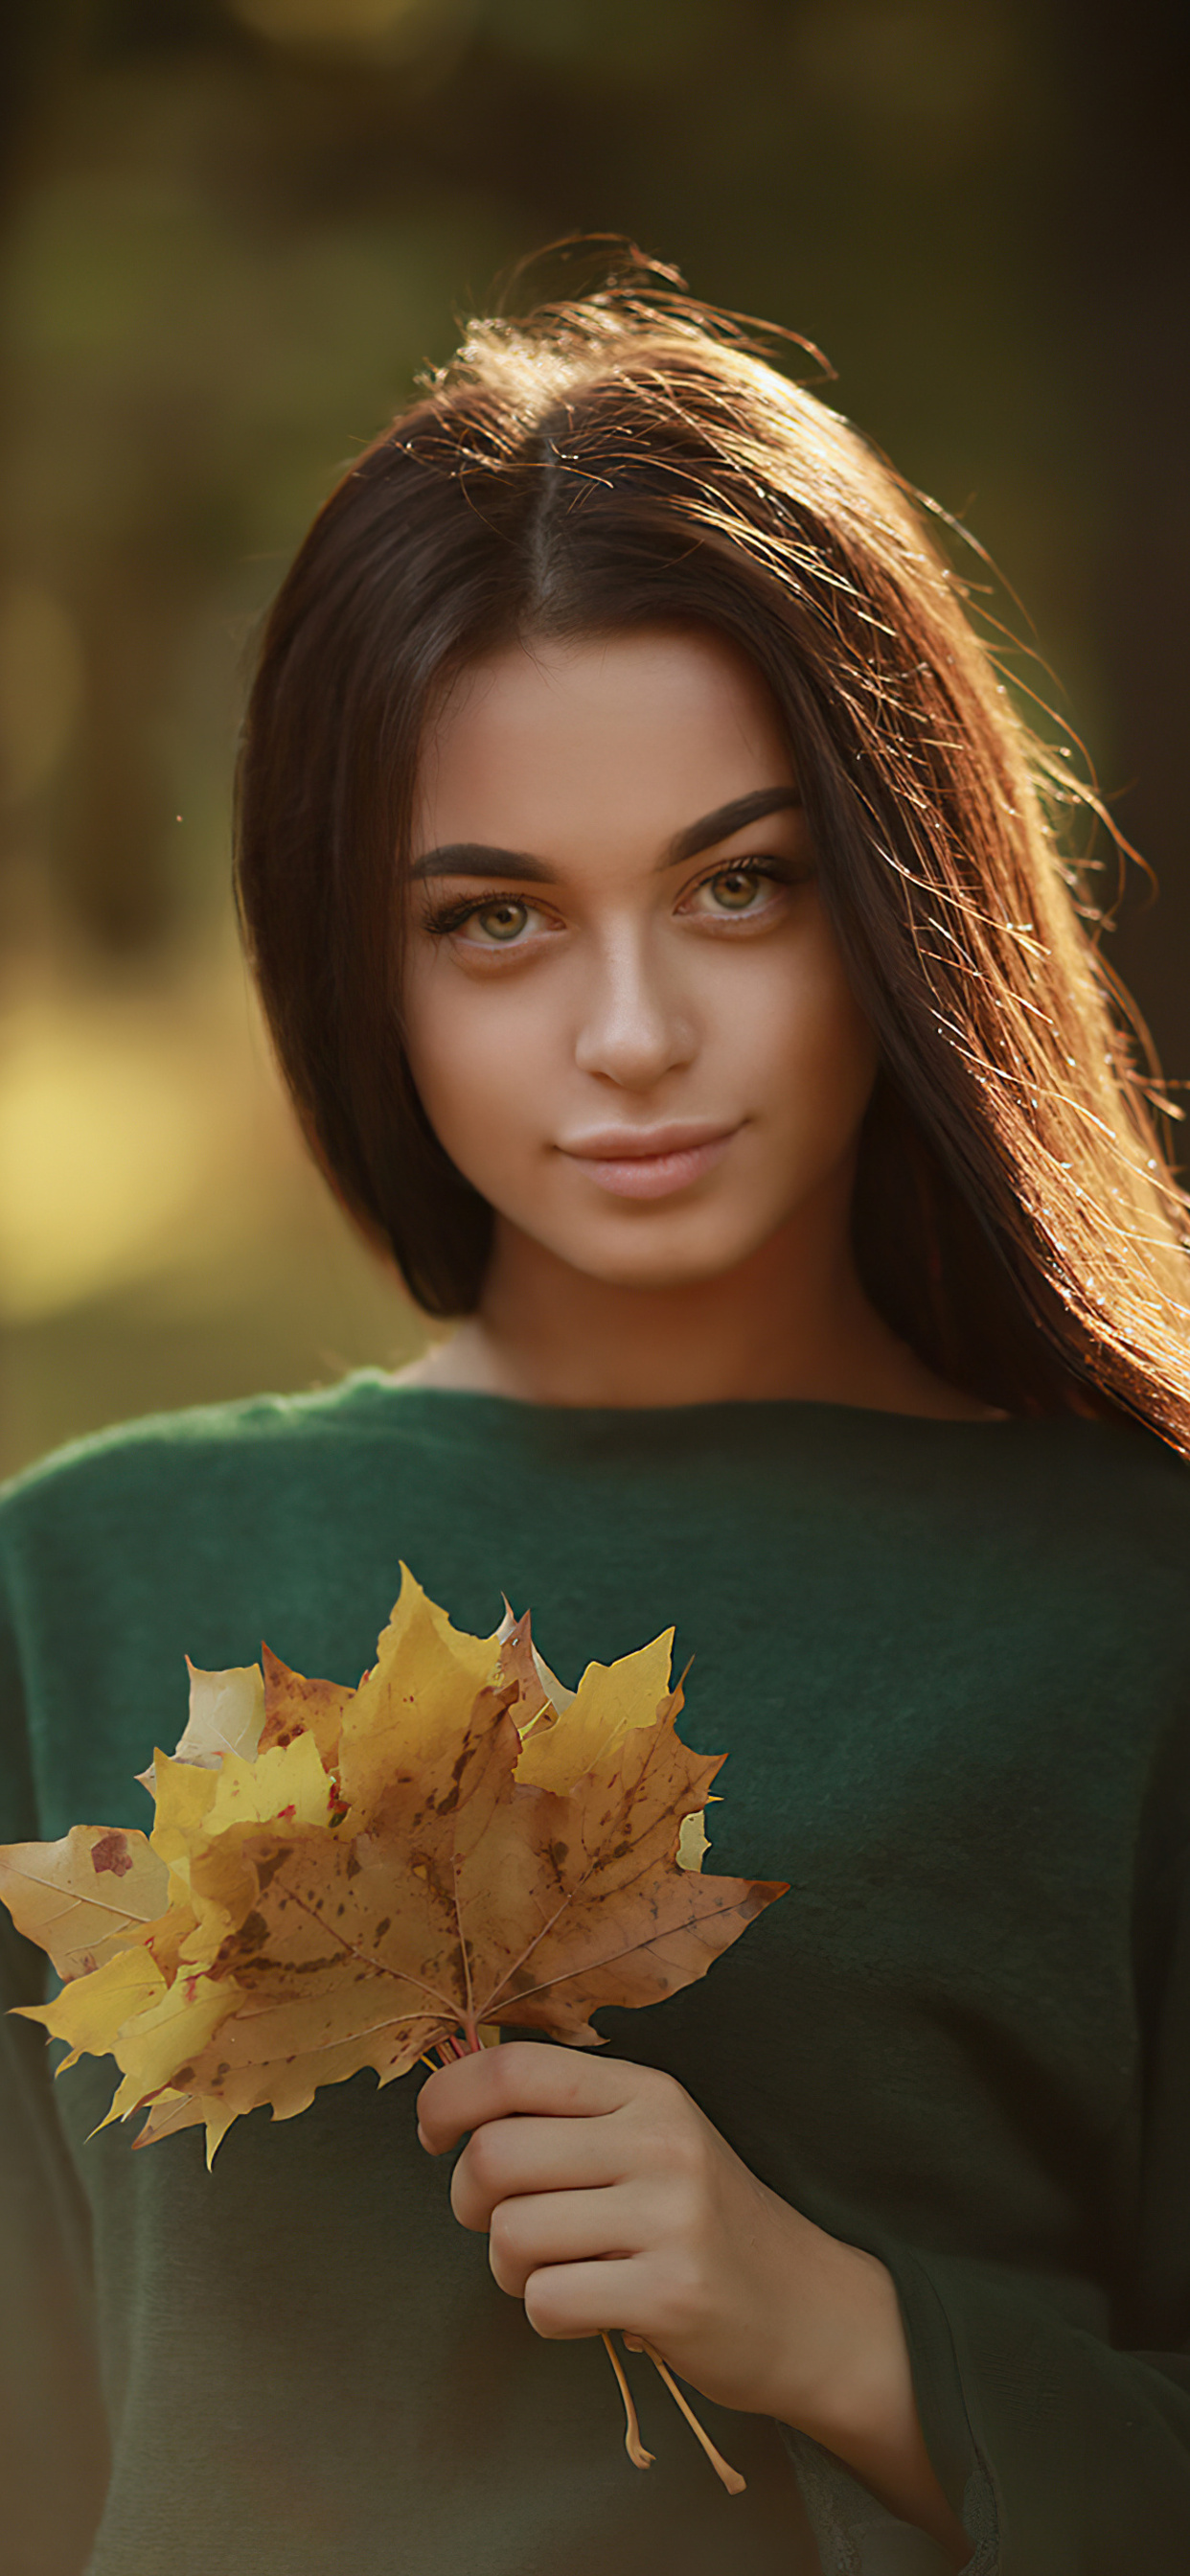 1242x2688 Girl Sweater Autumn Flowers 4k Iphone XS MAX HD 4k Wallpapers ...